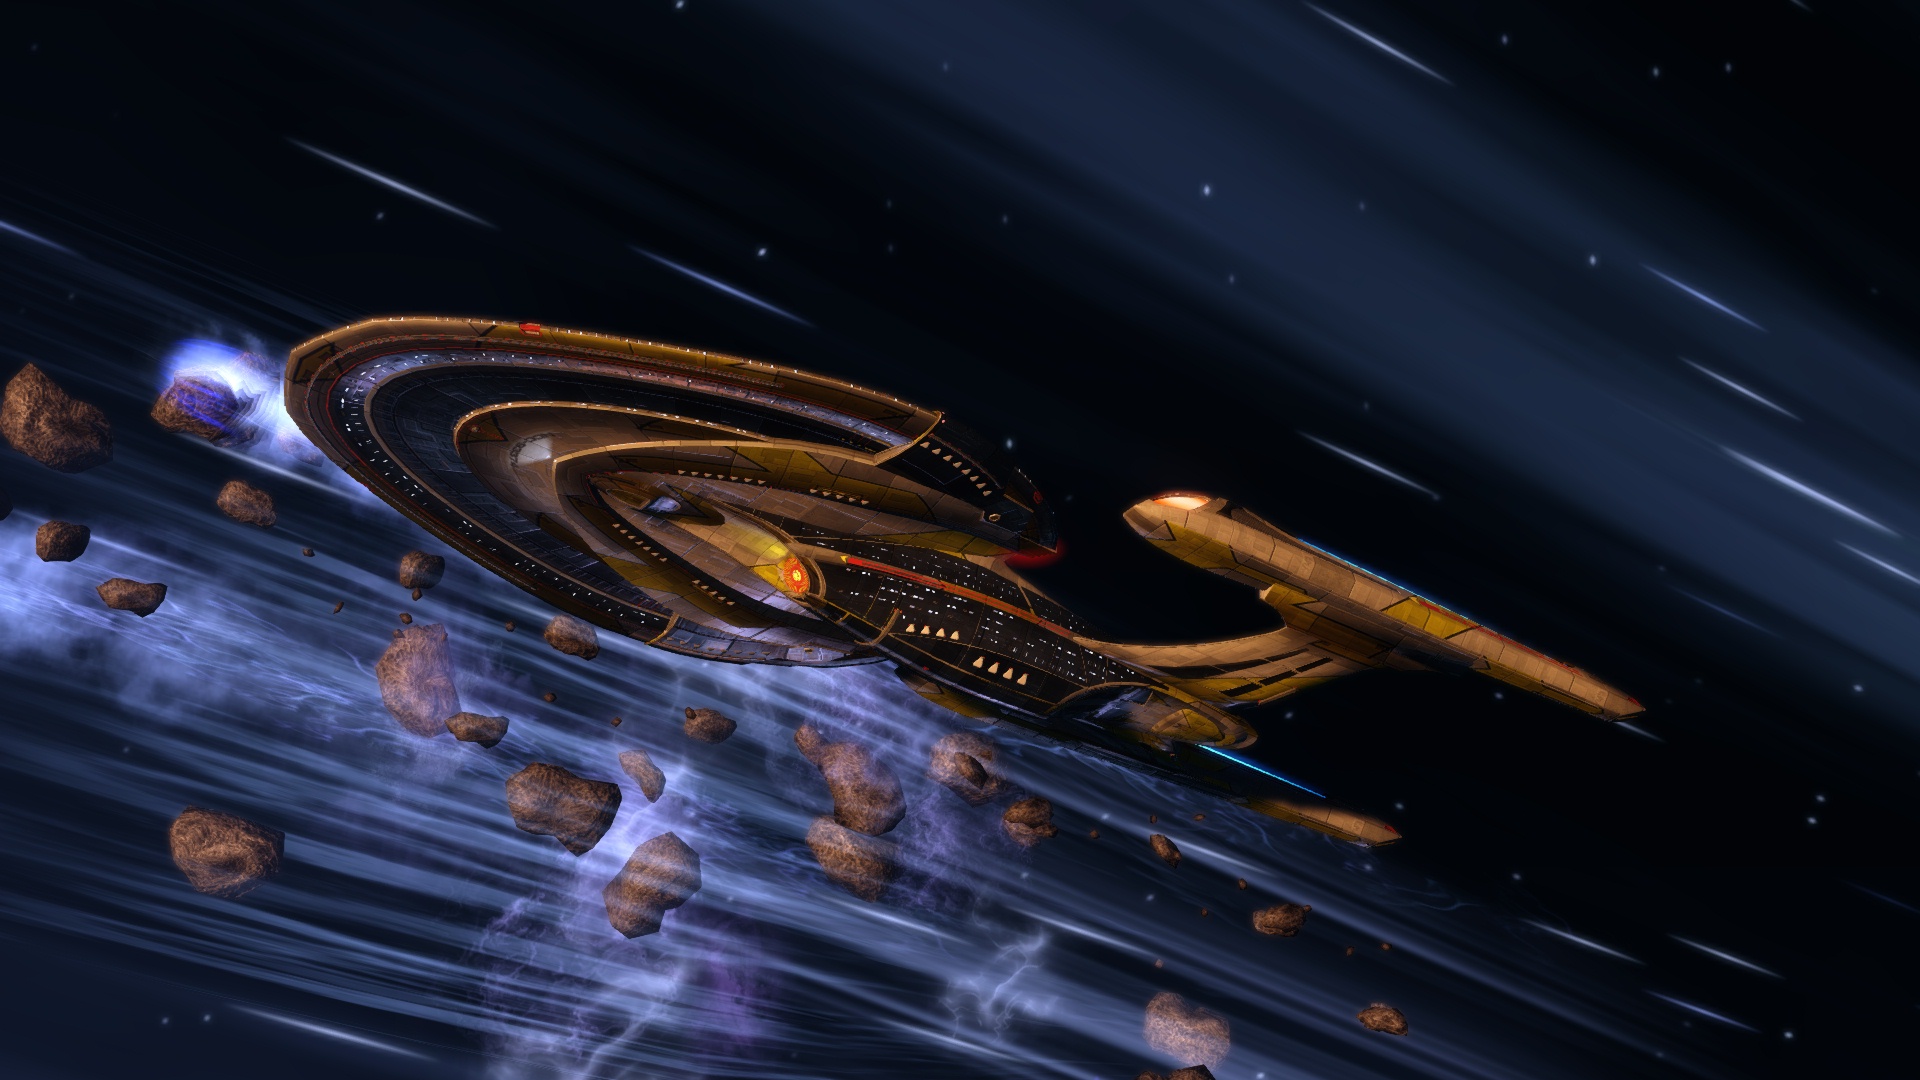 U.S.S. Firehawk in VZA 4001 'Out in the Cold' by jdciollins 12th Legacy Fleet